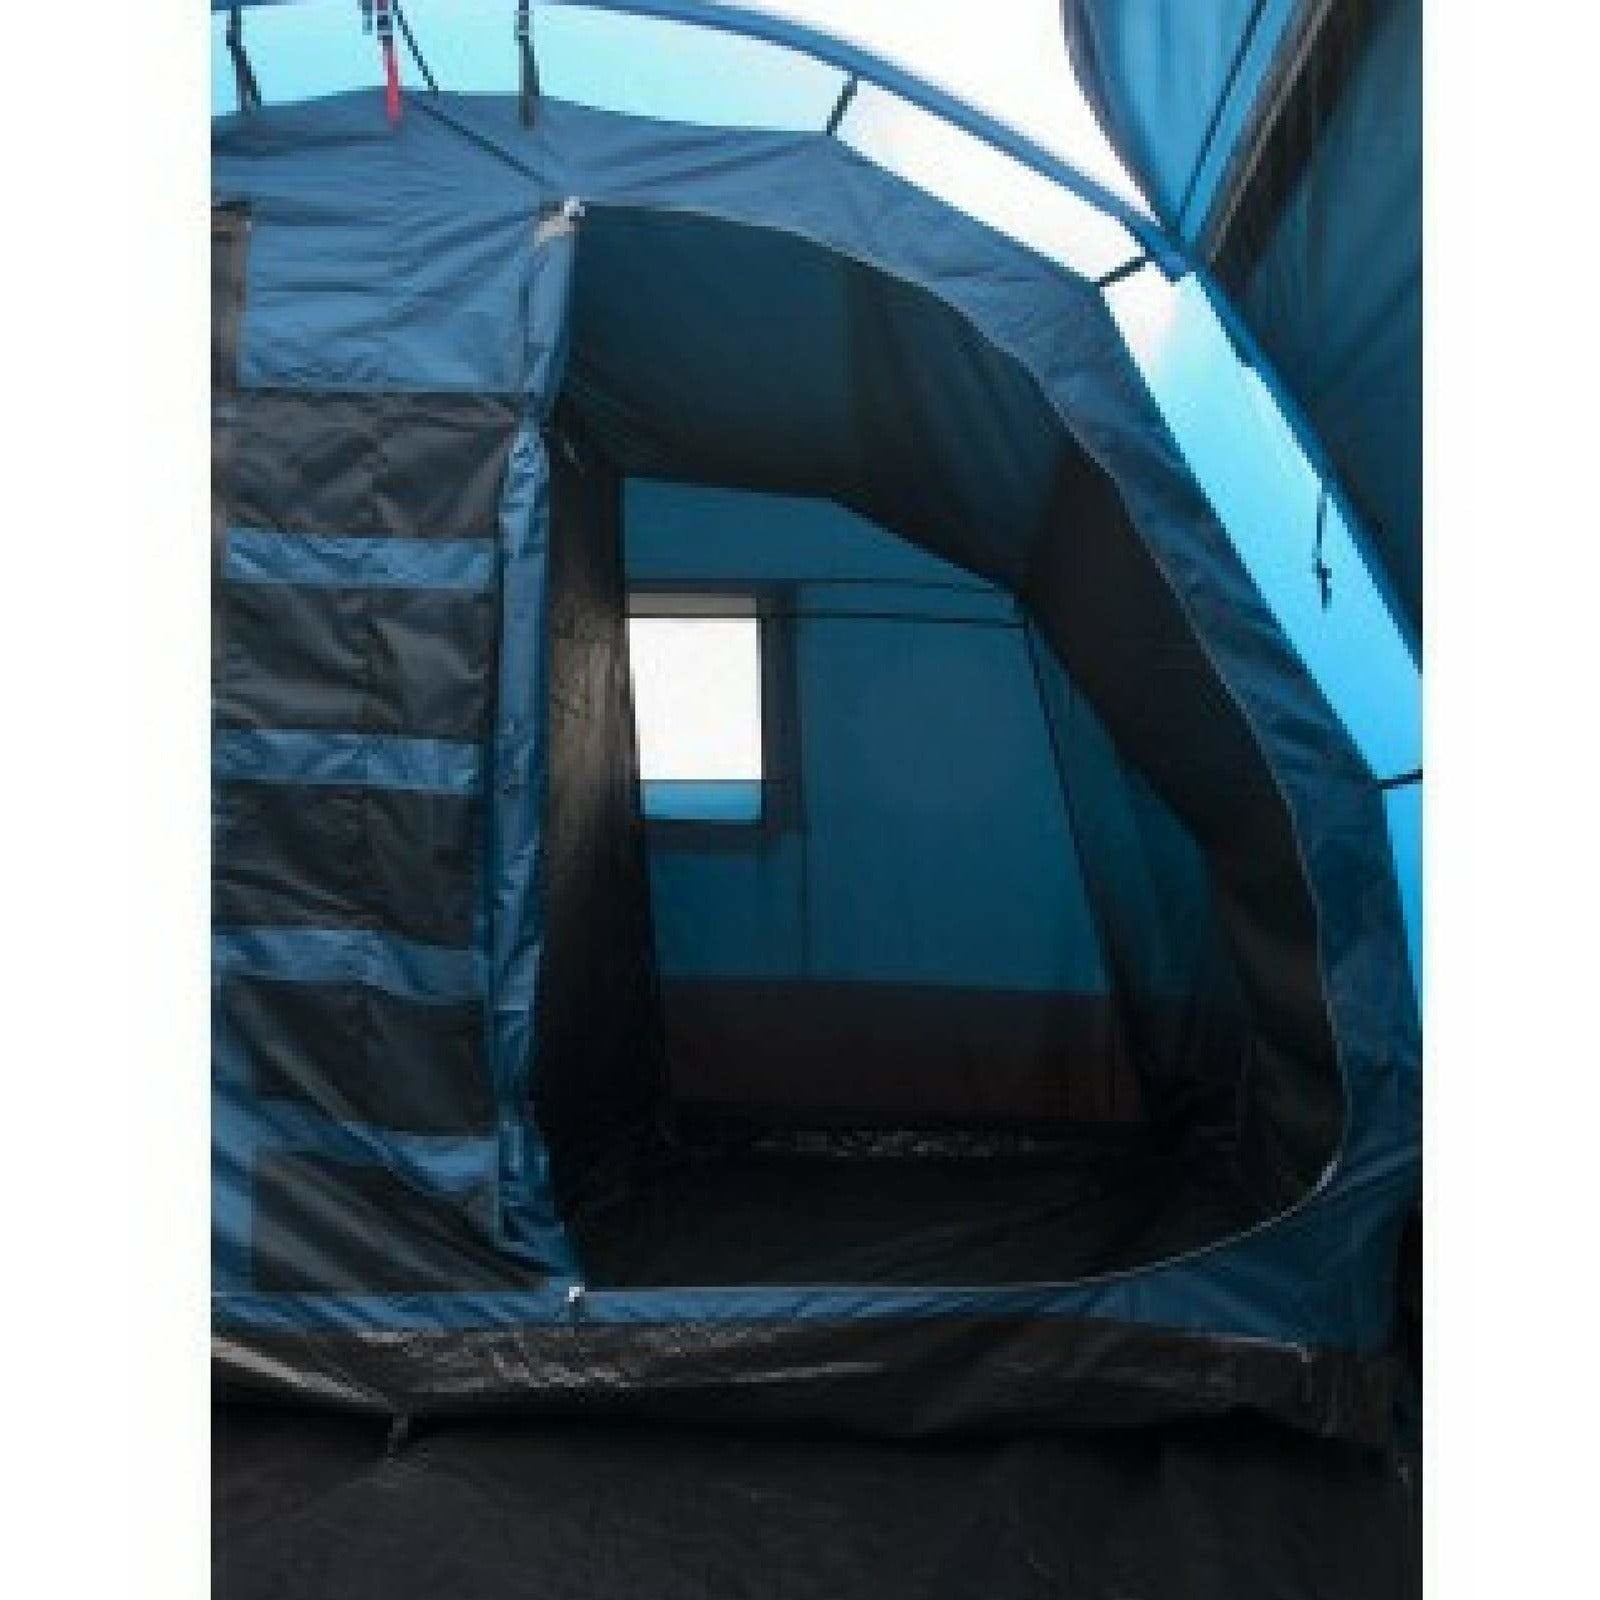 Royal Buckland 8 Person - Blue Pole Tent 302630 - Quality Caravan Awnings